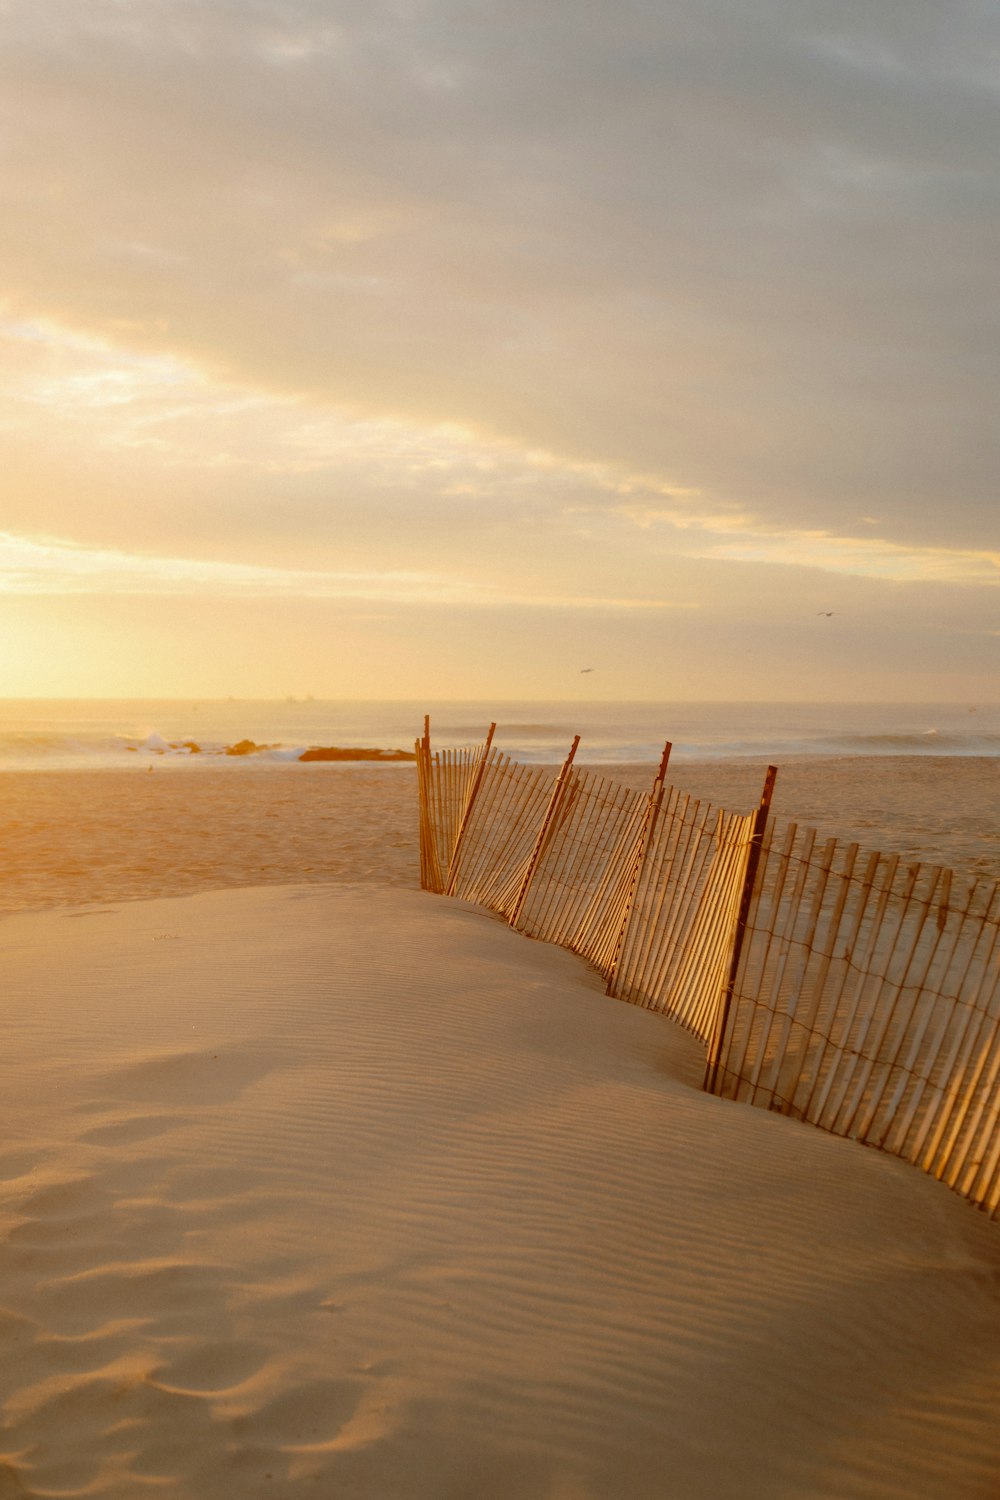 a sandy beach with a fence and ocean in the background